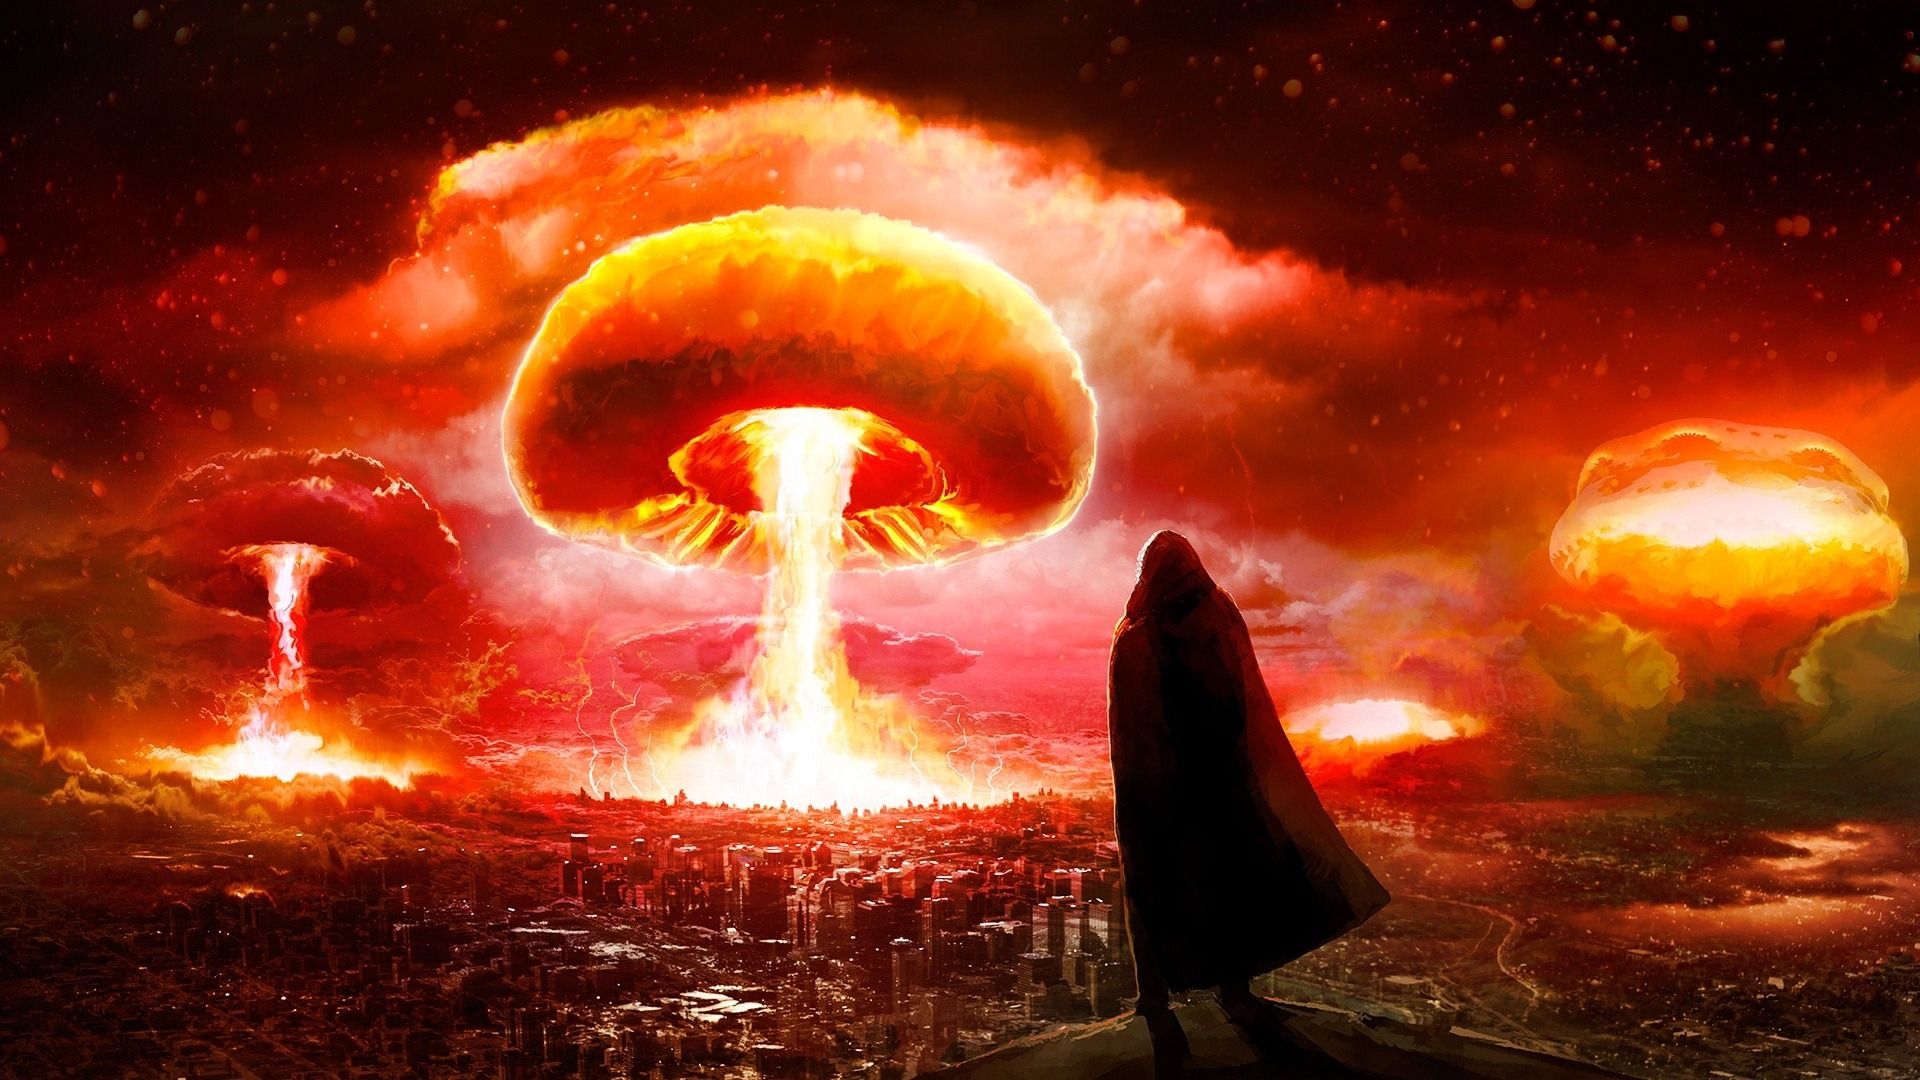 Free download Nuclear Bomb Explosion Wallpaper 12503 Baltana